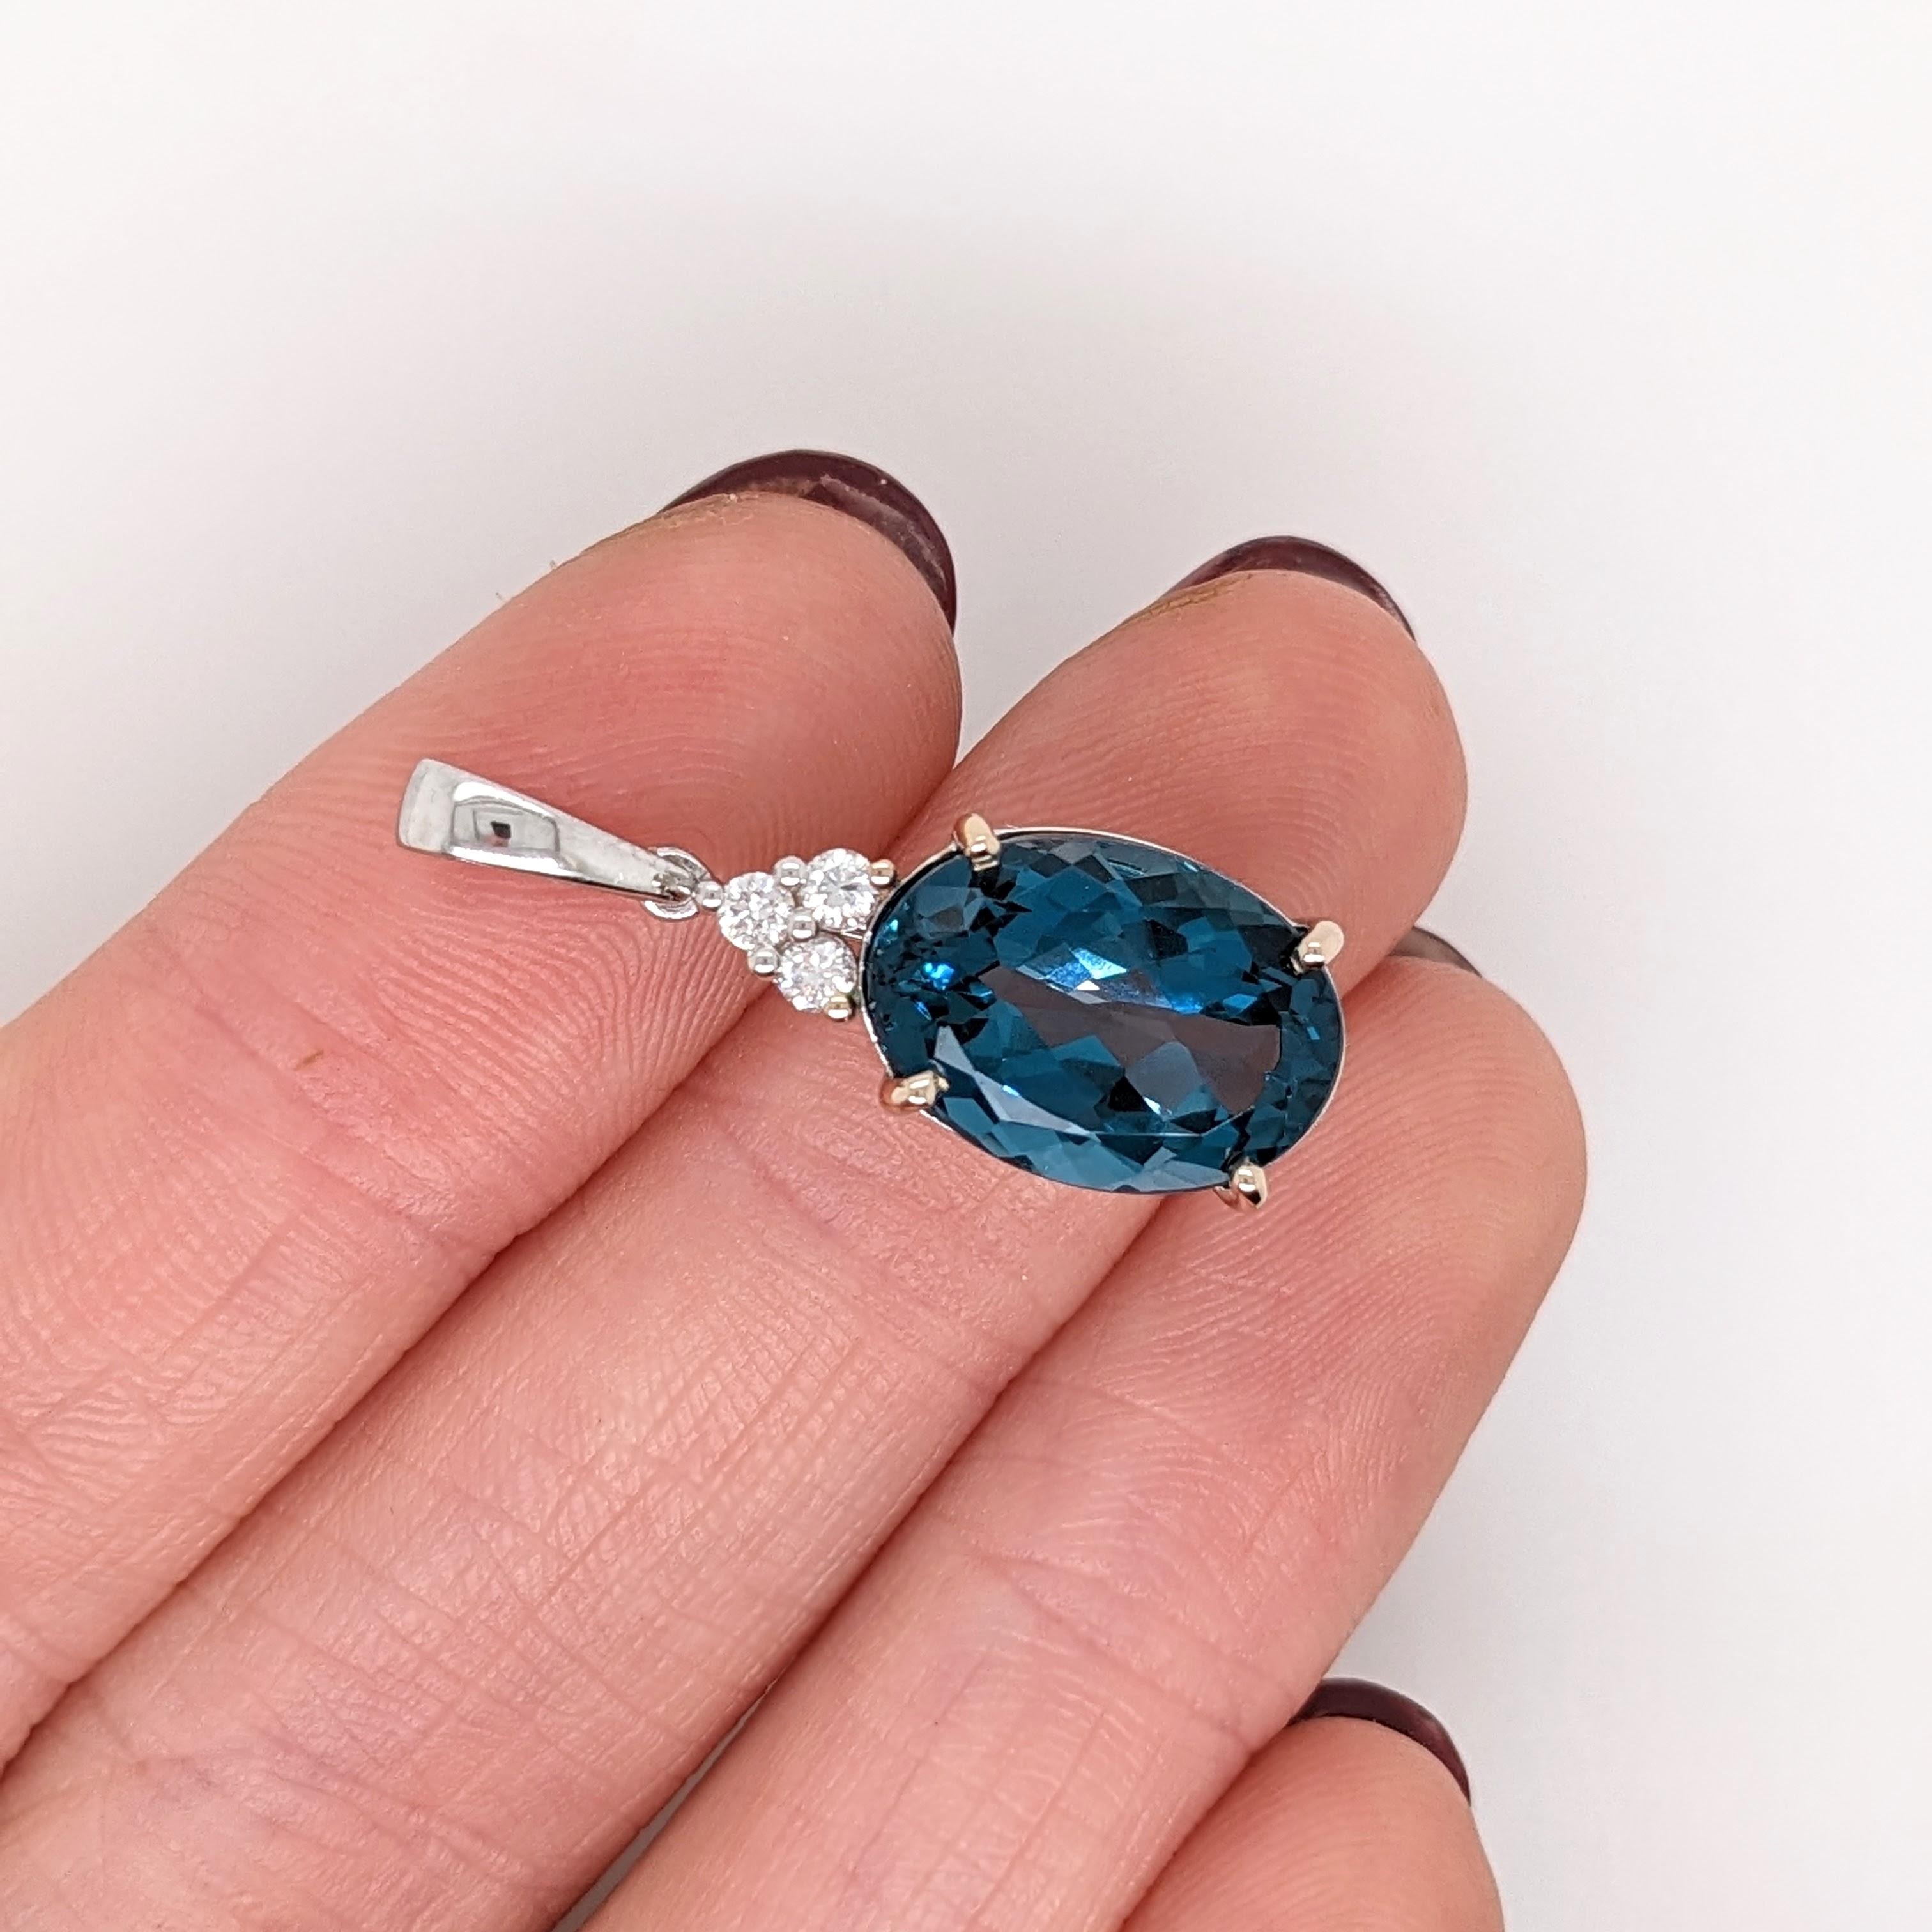 6.72ct London Blue Topaz Pendant w Natural Diamonds in Solid 14K Gold Oval 14x10